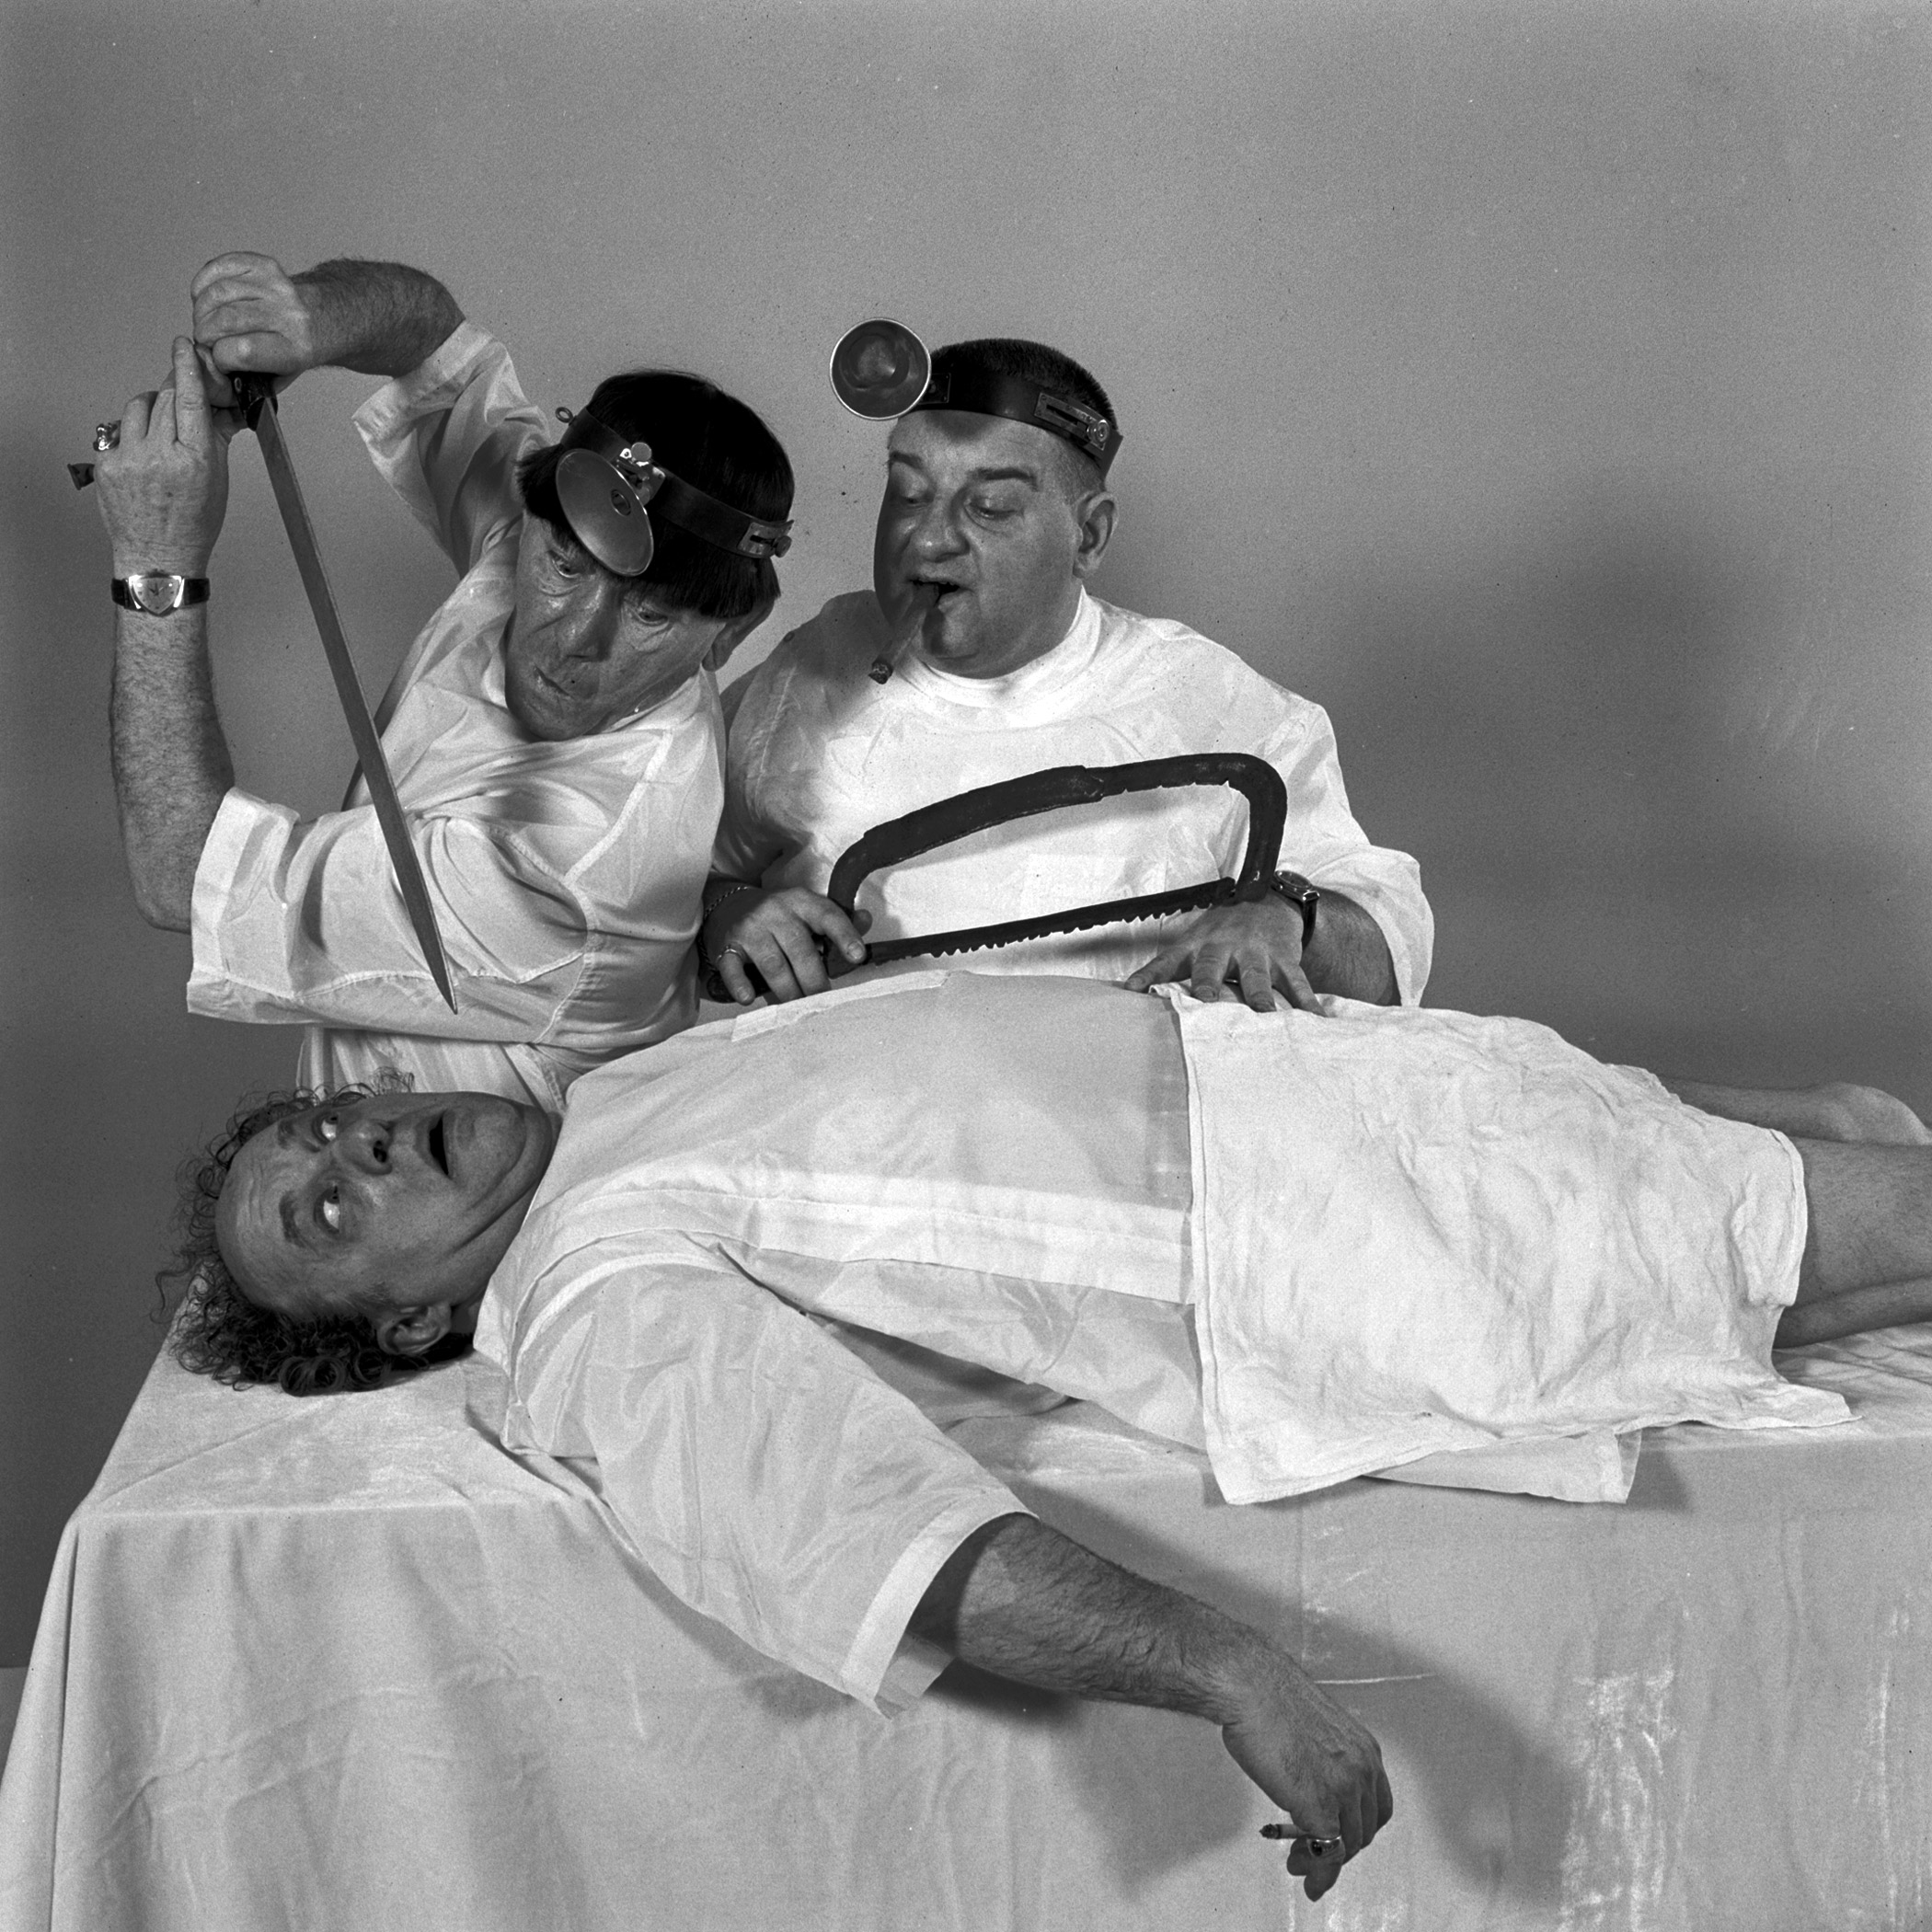 Three Stooges acting out a skit in May 1959.